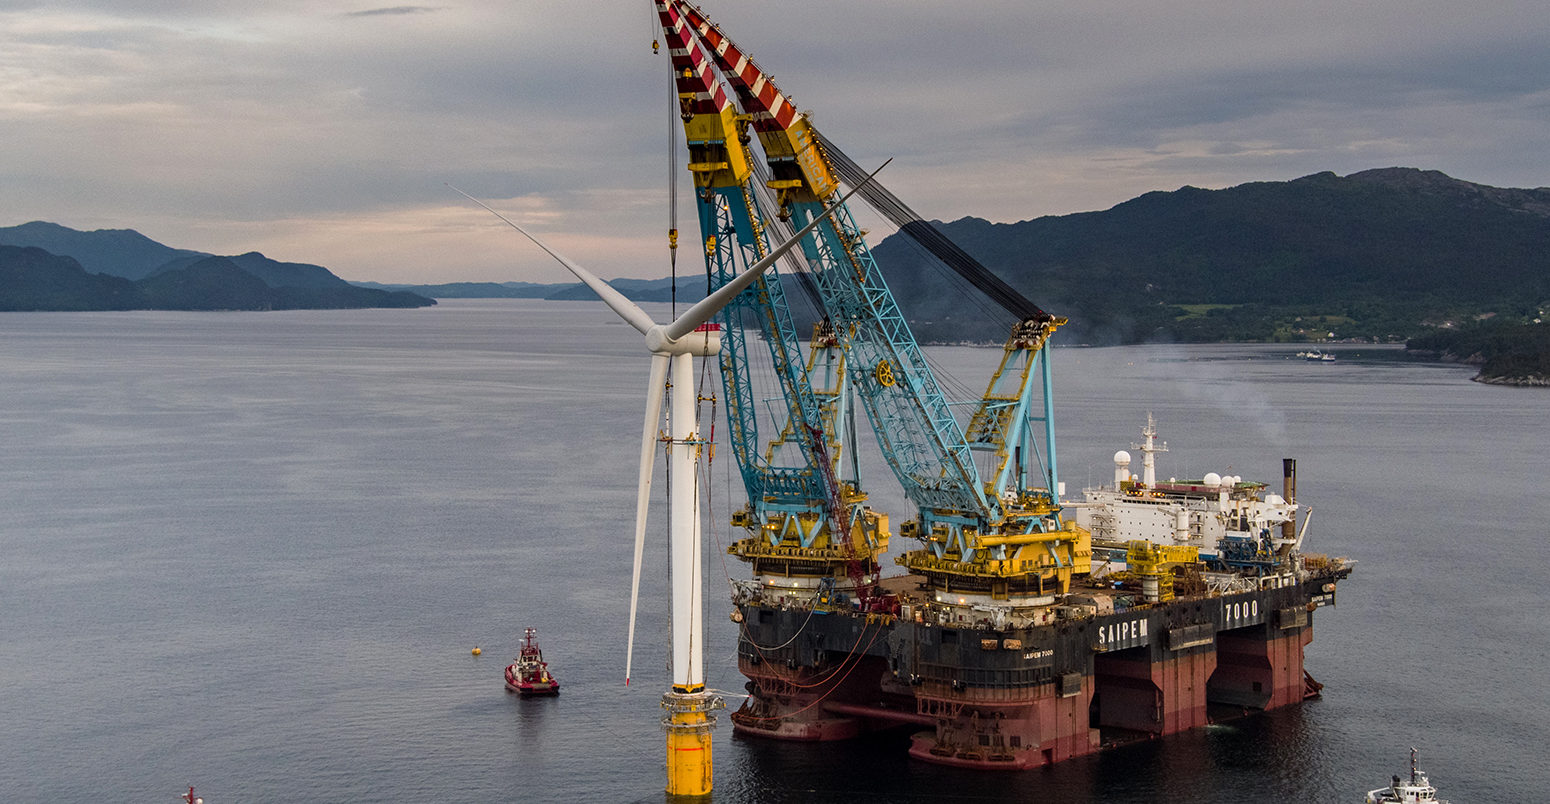 Mating of Hywind Scotland wind turbine, operation performed by Saipem 7000, 21/06/2017.